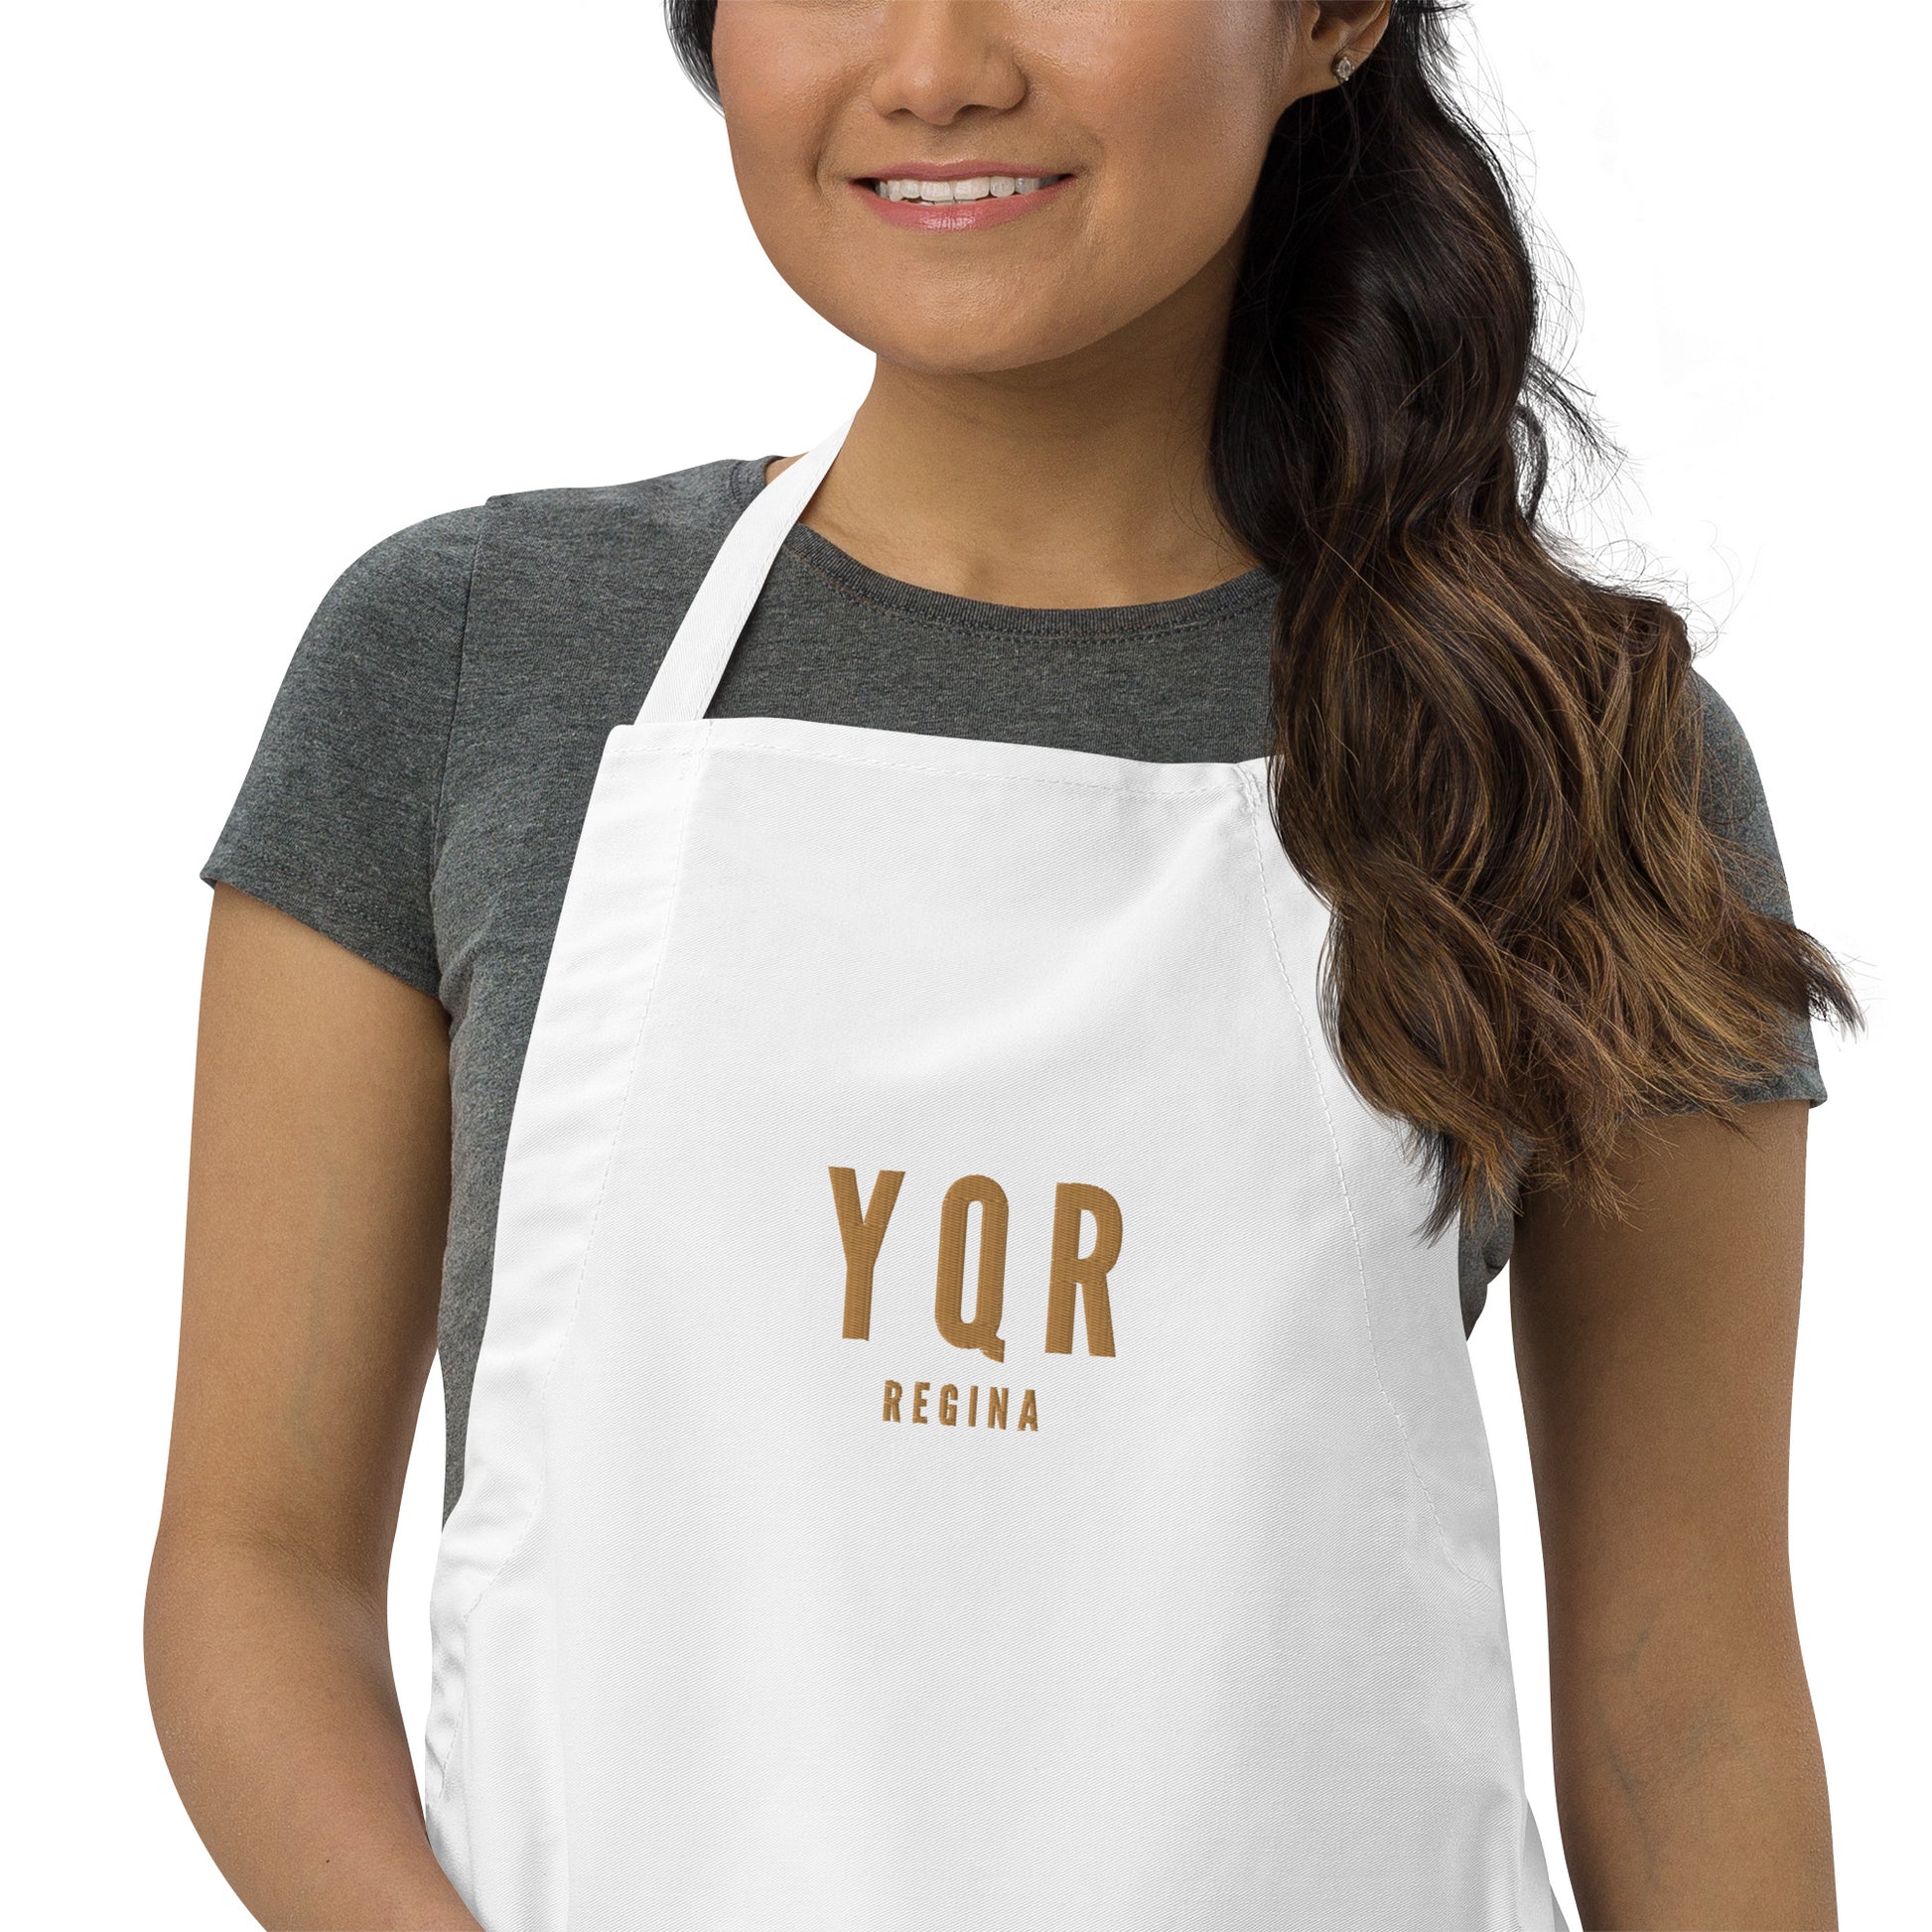 City Embroidered Apron - Old Gold • YQR Regina • YHM Designs - Image 08